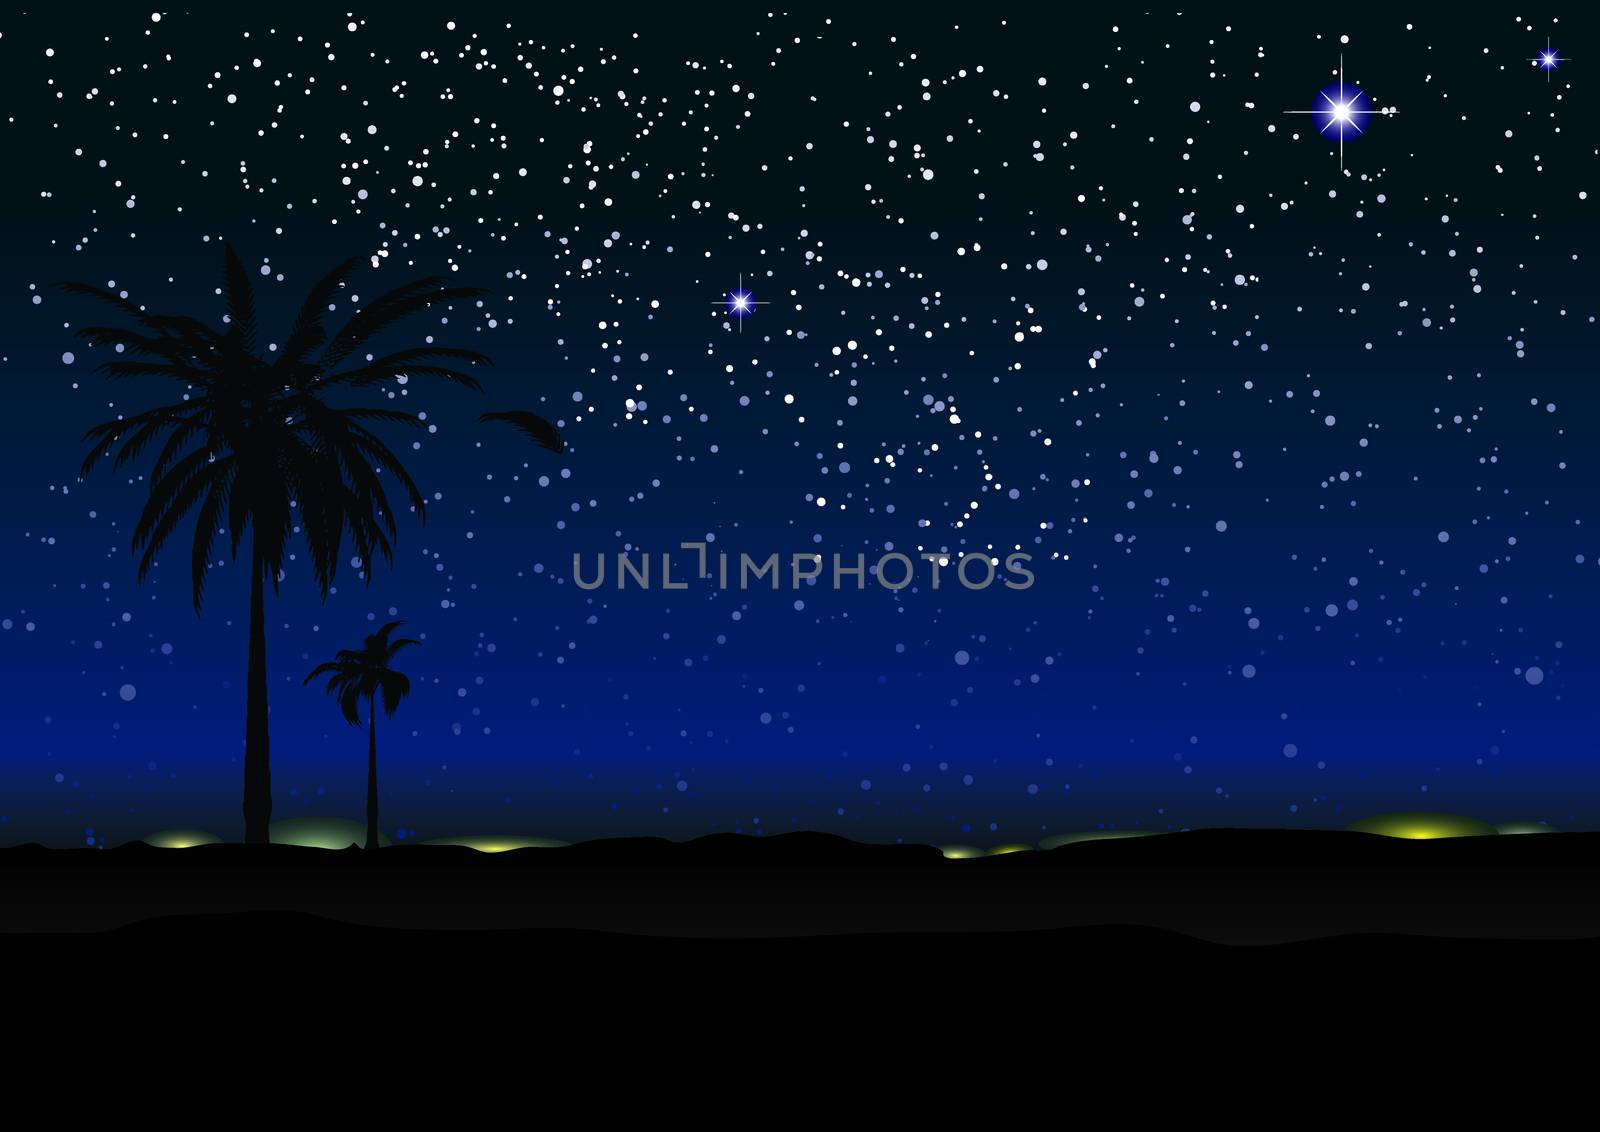 Nights sky with stars and palm trees in silhouette